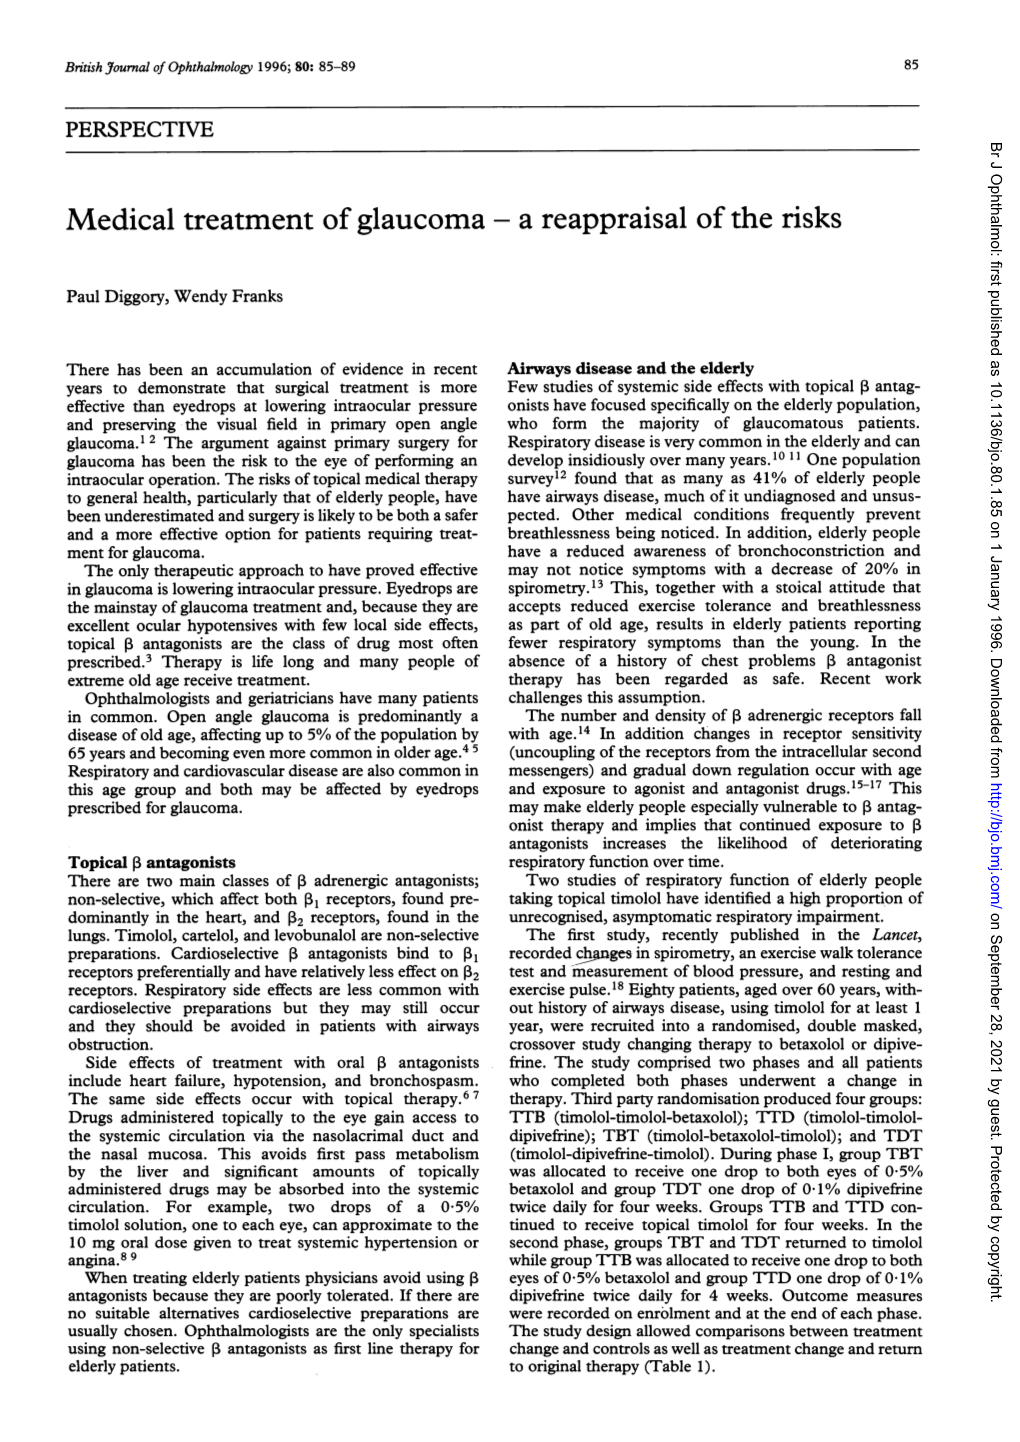 Medical Treatment of Glaucoma - a Reappraisal of the Risks